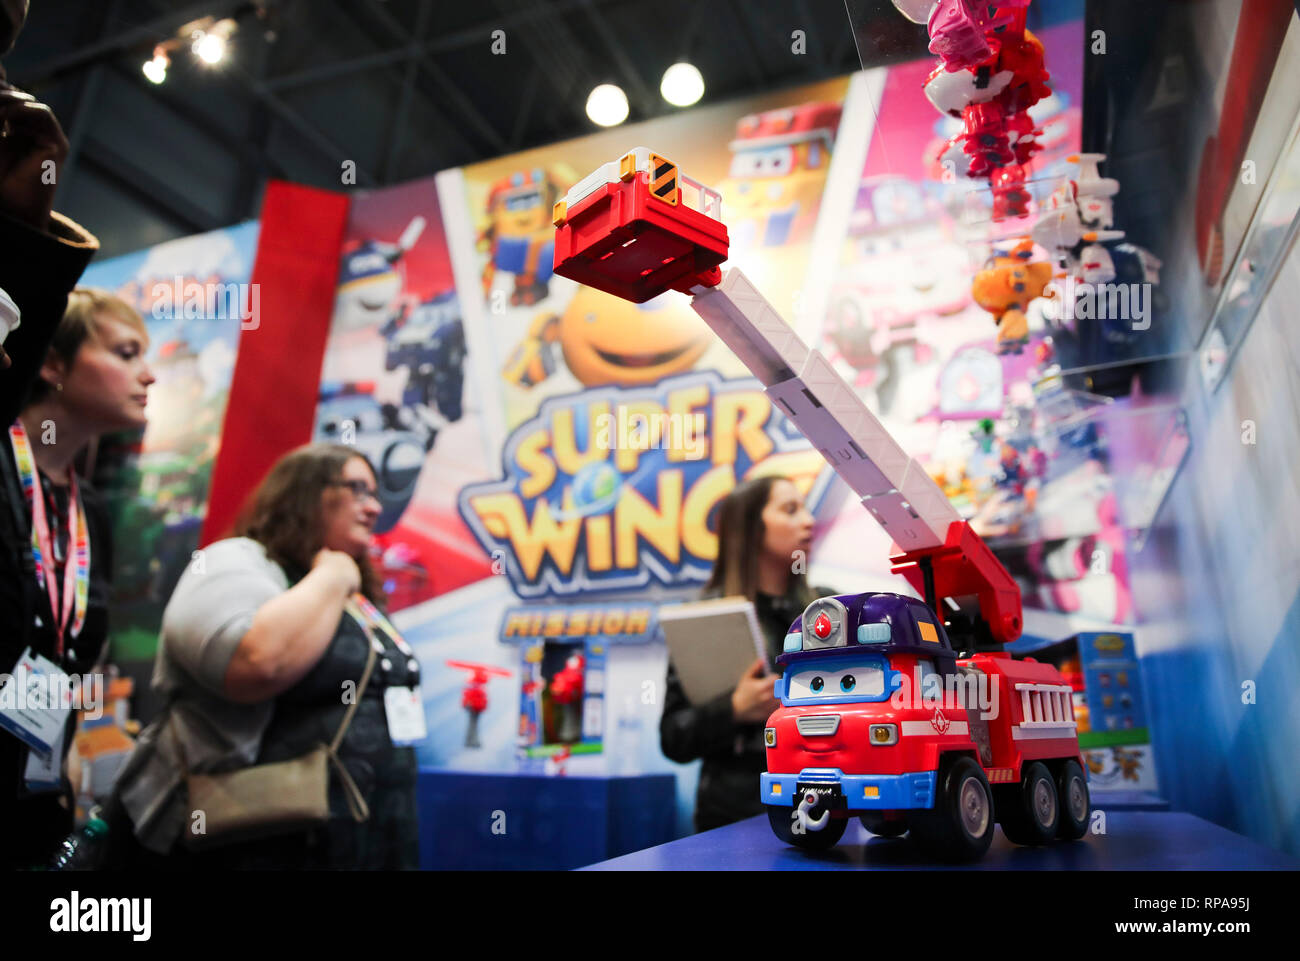 (190221) -- NEW YORK, Feb. 21, 2019 (Xinhua) -- Visitors look at toy products of Super Wings at the booth of Alpha Group Co., Ltd., a major animation, toy and entertainment player from Guangdong Province in southern China, during the 116th Annual North American International Toy Fair at the Jacob K. Javits Convention Center in New York, the United States, Feb. 19, 2019. Chinese toy manufacturers, which produce around 75 percent of global toys each year, are rising up the value chain from the original role as contract manufacturers to designers and makers of their own brands. (Xinhua/Wang Ying) Stock Photo